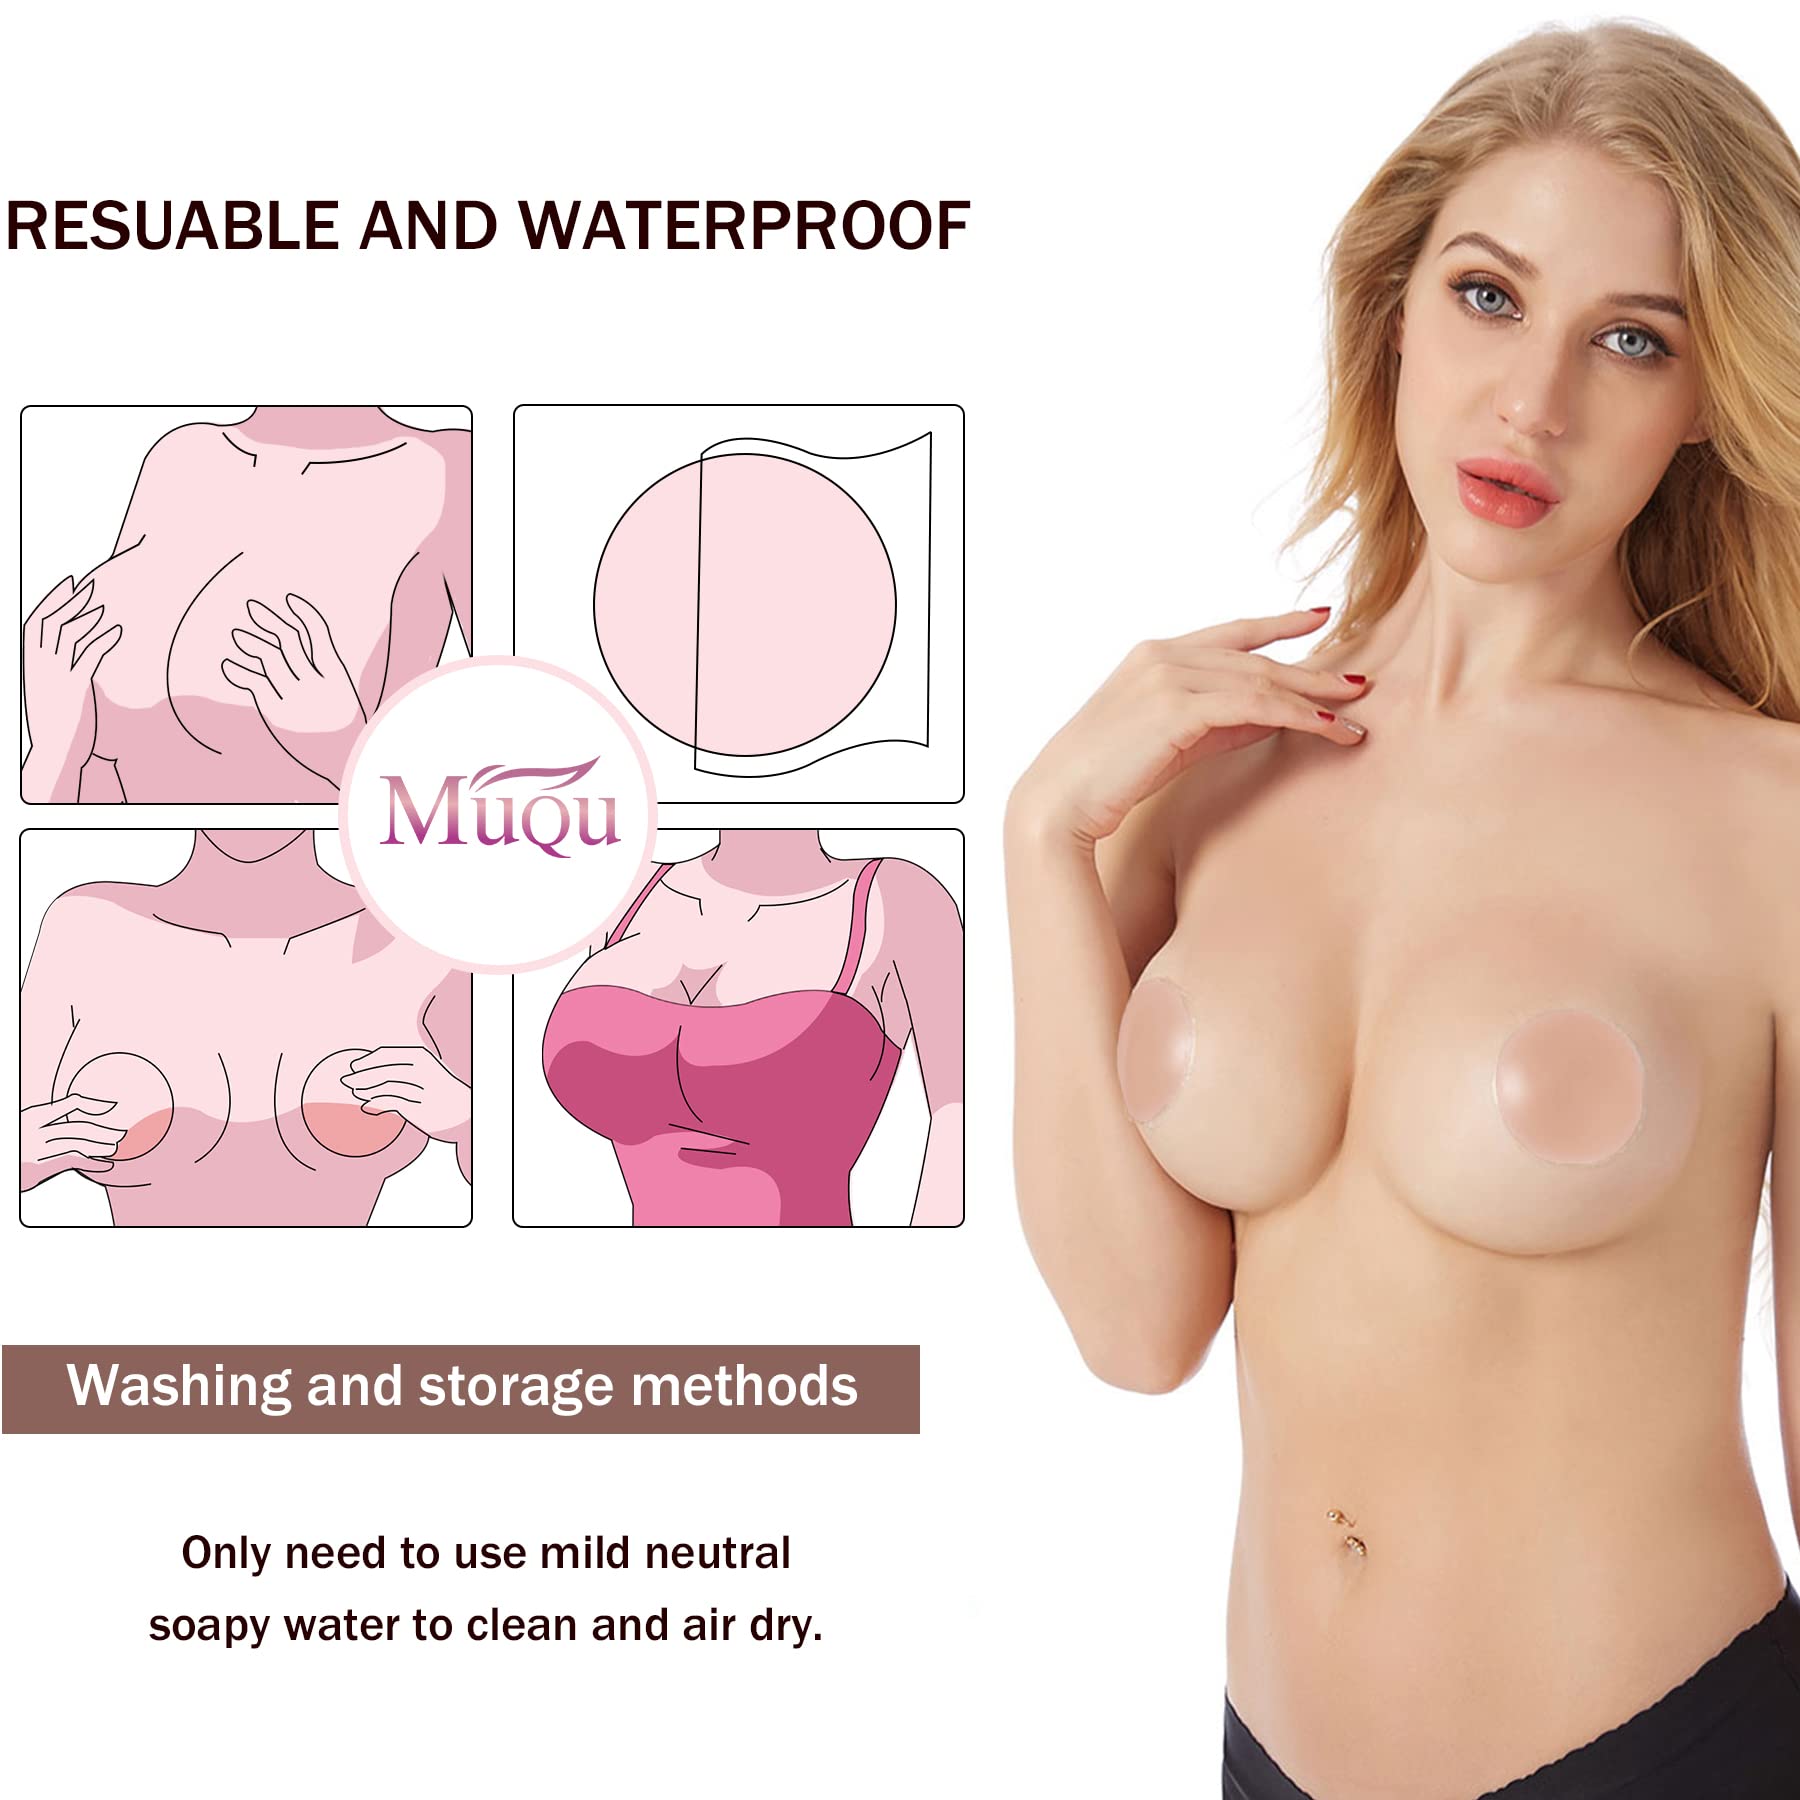 MUQU Pasties Nipple Covers - Silicone Nipple Covers Reusable Adhesive Invisible Nippleless Cover Breast Petals for Women